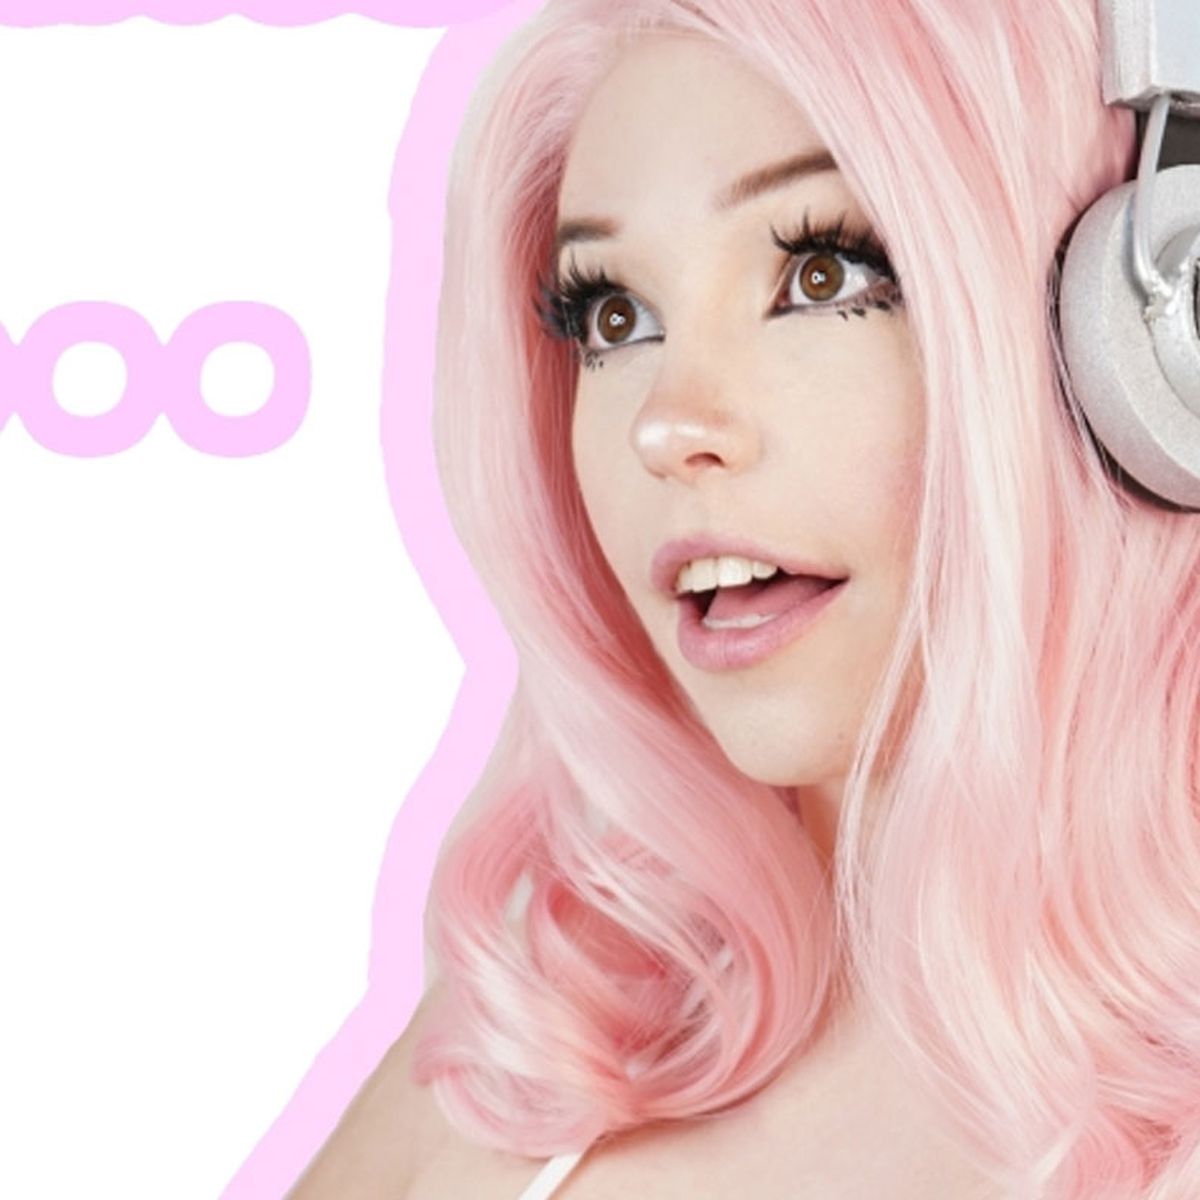 Instagram closes Belle Delphine's account, Cosplayer sold the